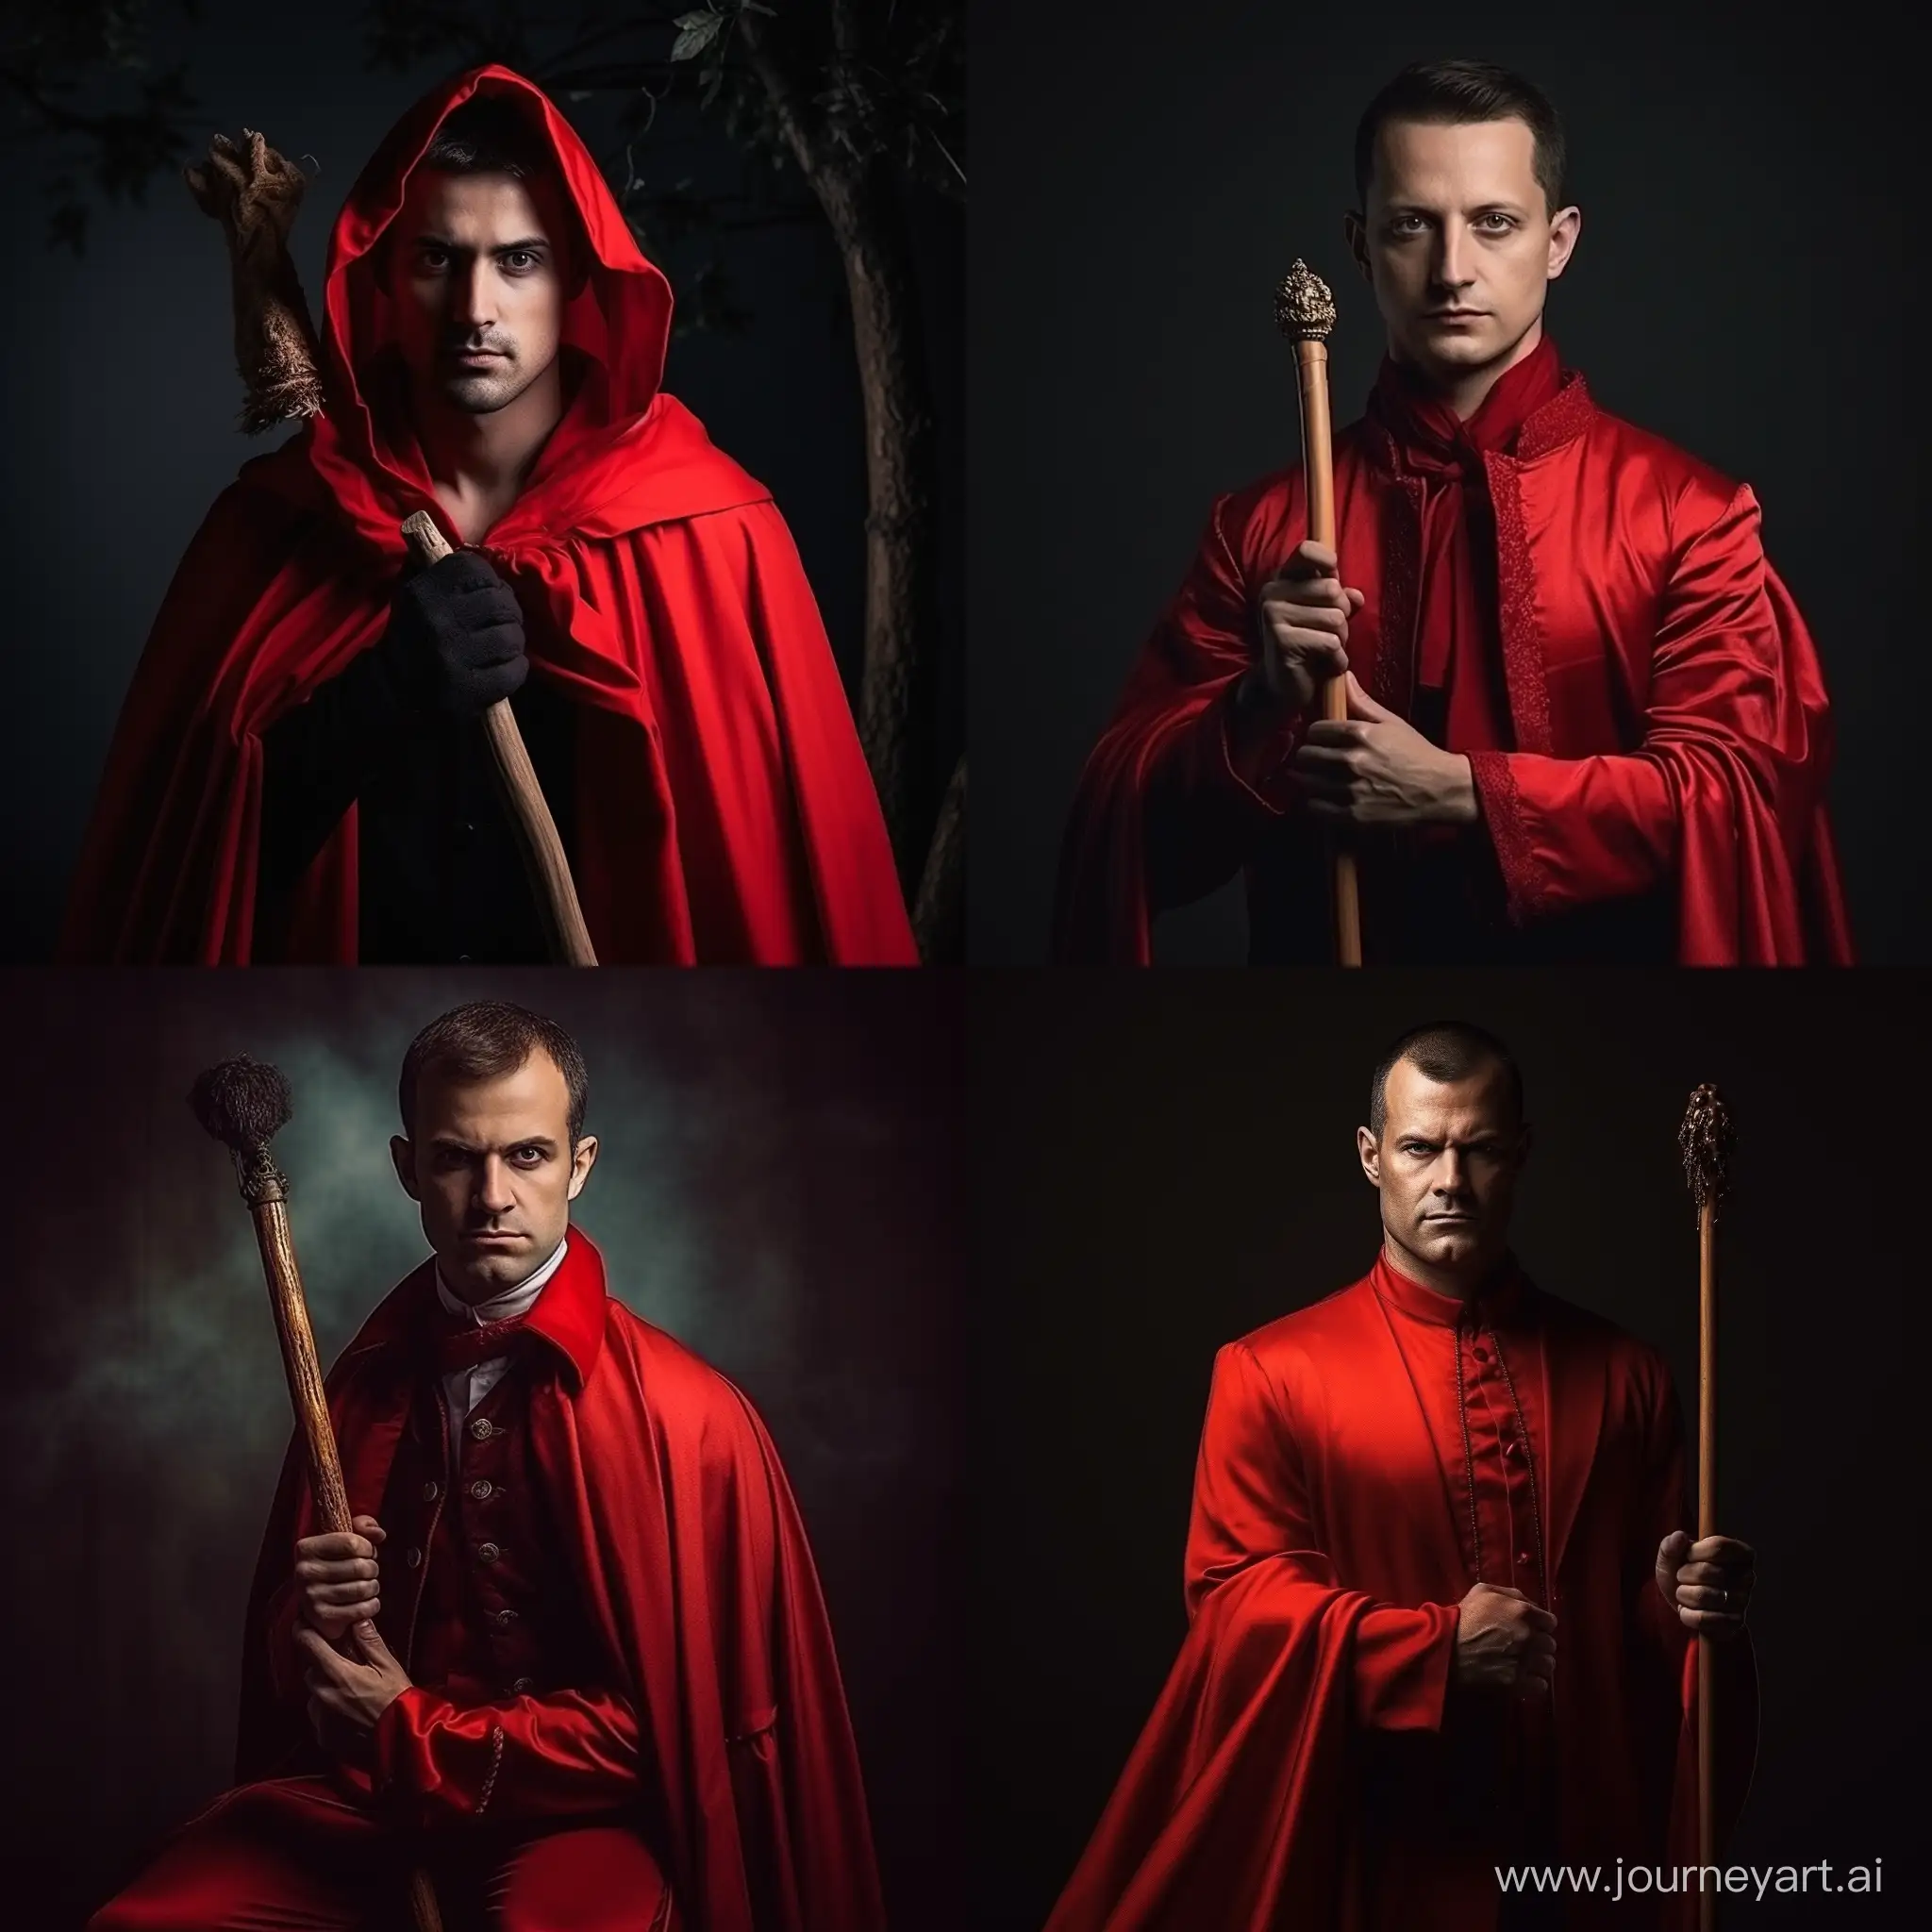 Magician without a hat and In a red cloak with red costume In his hands is a magician's stick

